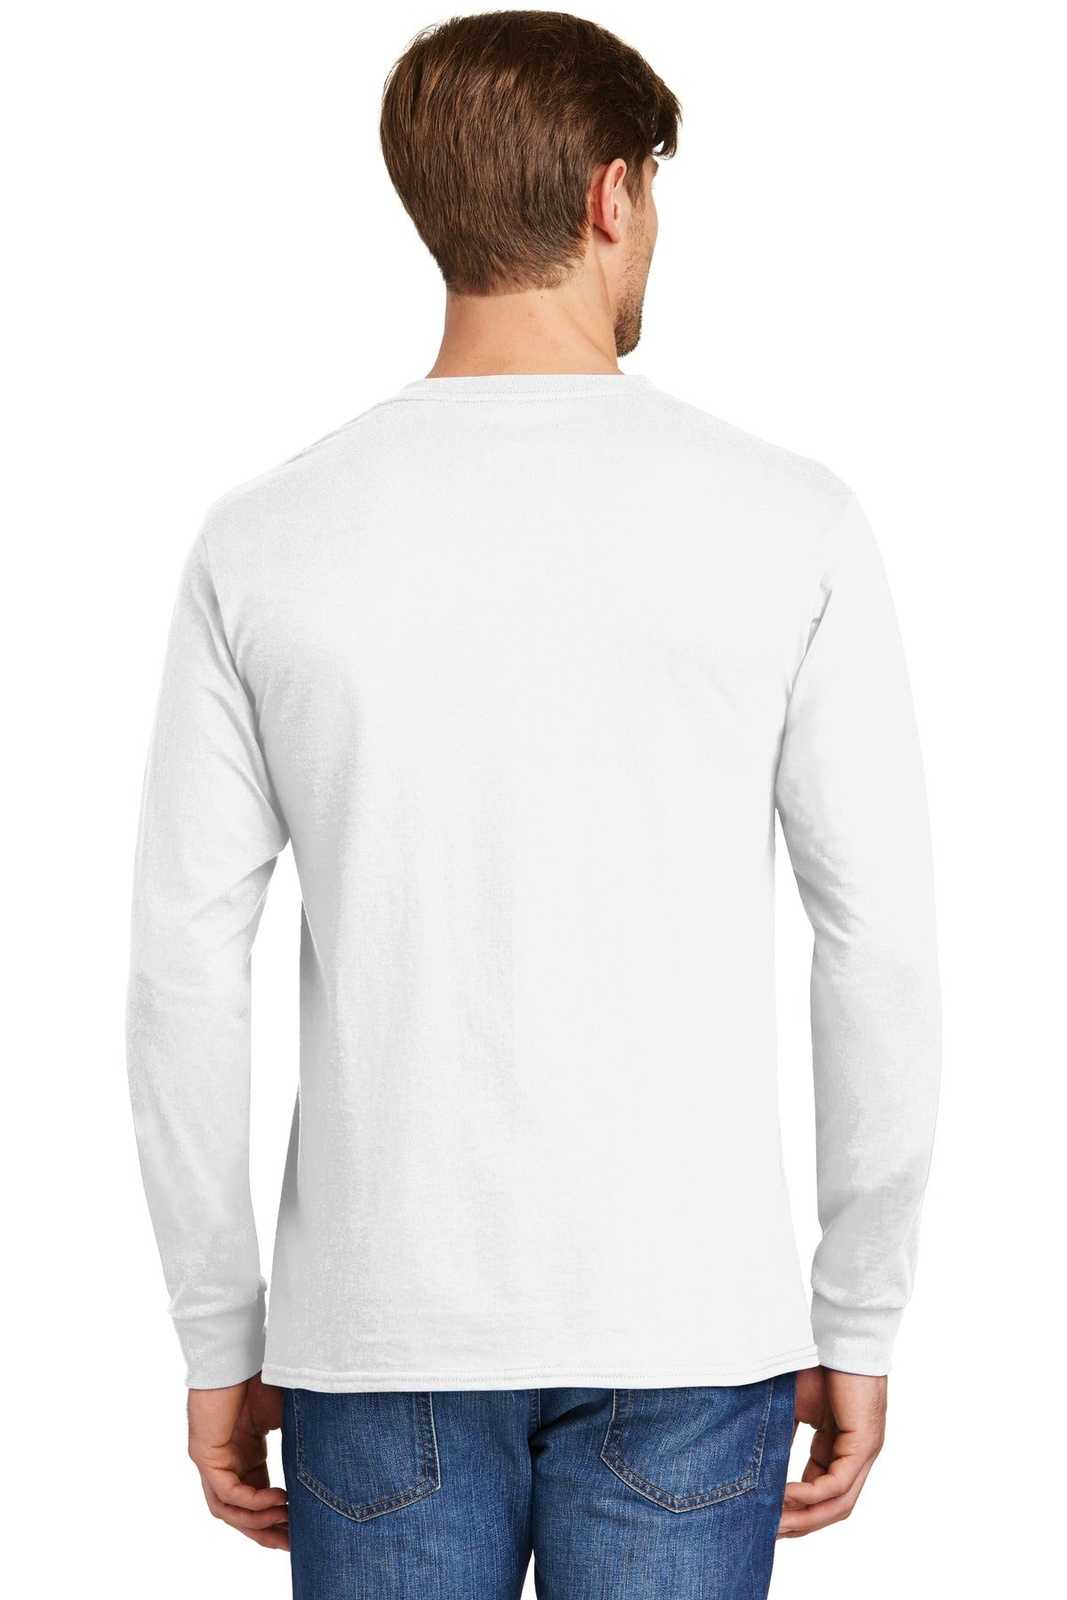 Hanes 5586 Tagless 100% Cotton Long Sleeve T-Shirt - White - HIT a Double